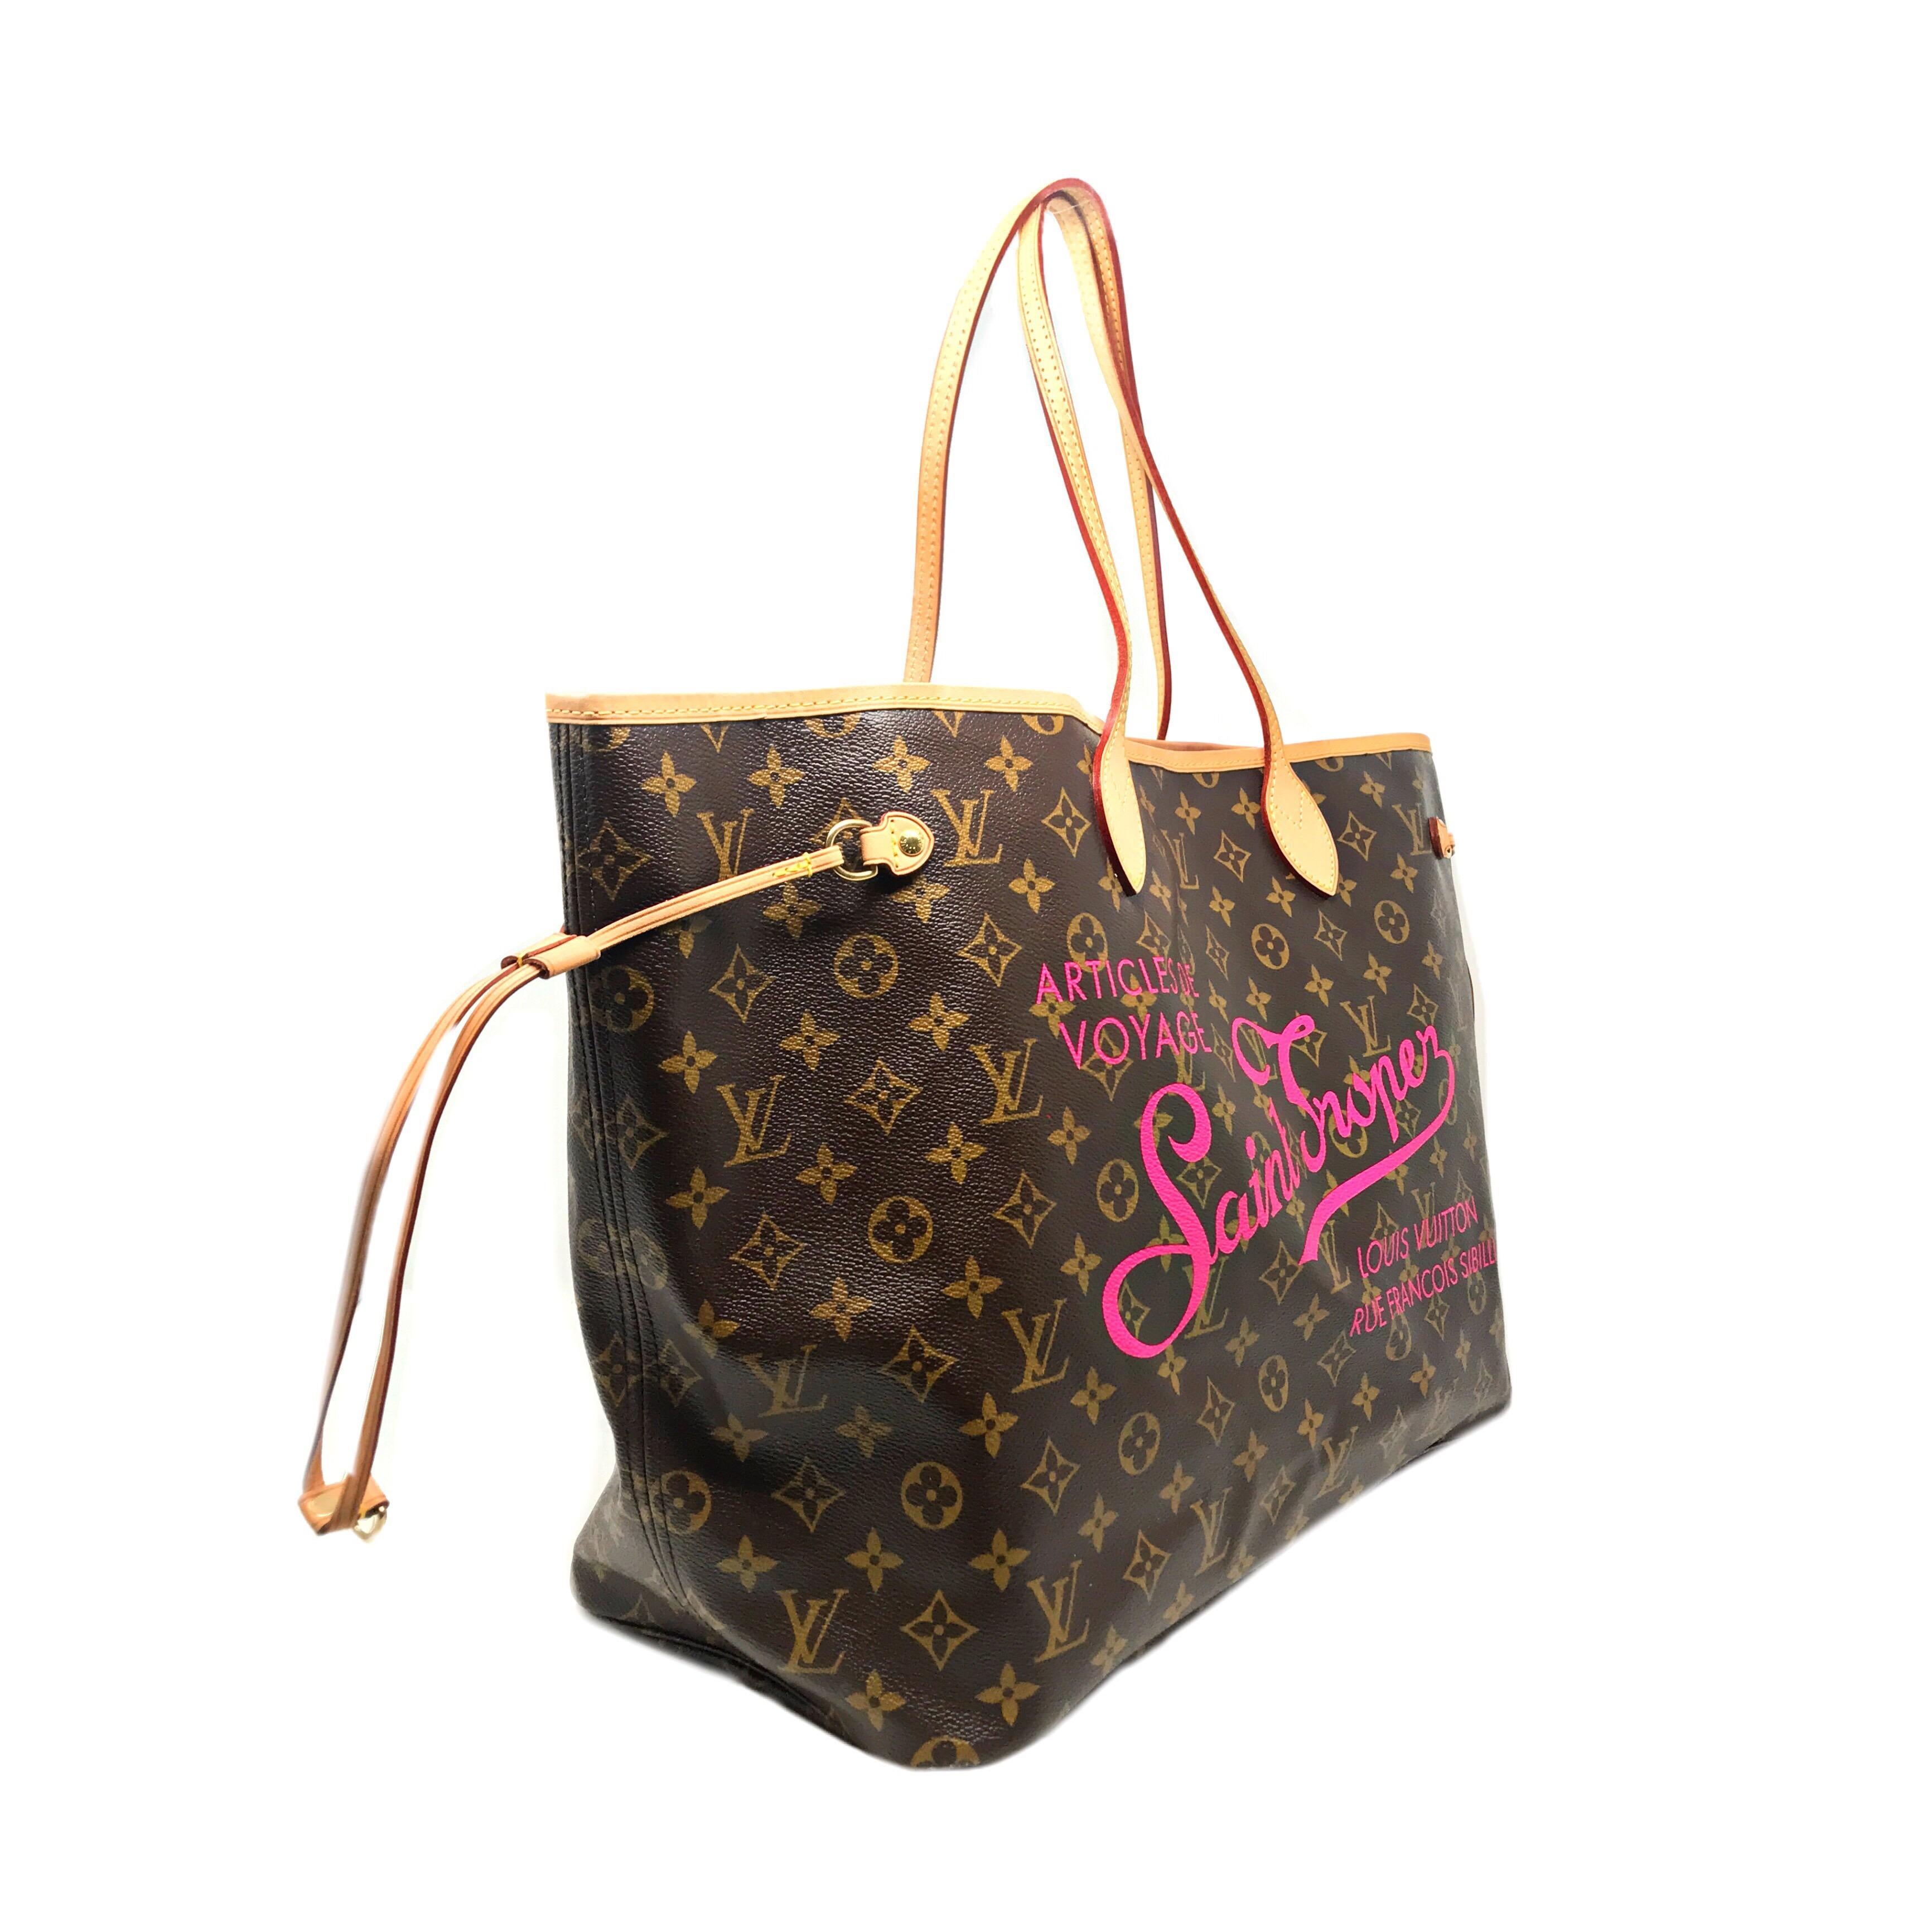 LOUIS VUITTON GM Monogram Saint Tropez Neverfull. This elegant bag is made from the Louis Vuitton monogram on canvas and is large in size. The tote has upper handles with vachetta natural cowhide leather strap, side trims and cords with polished